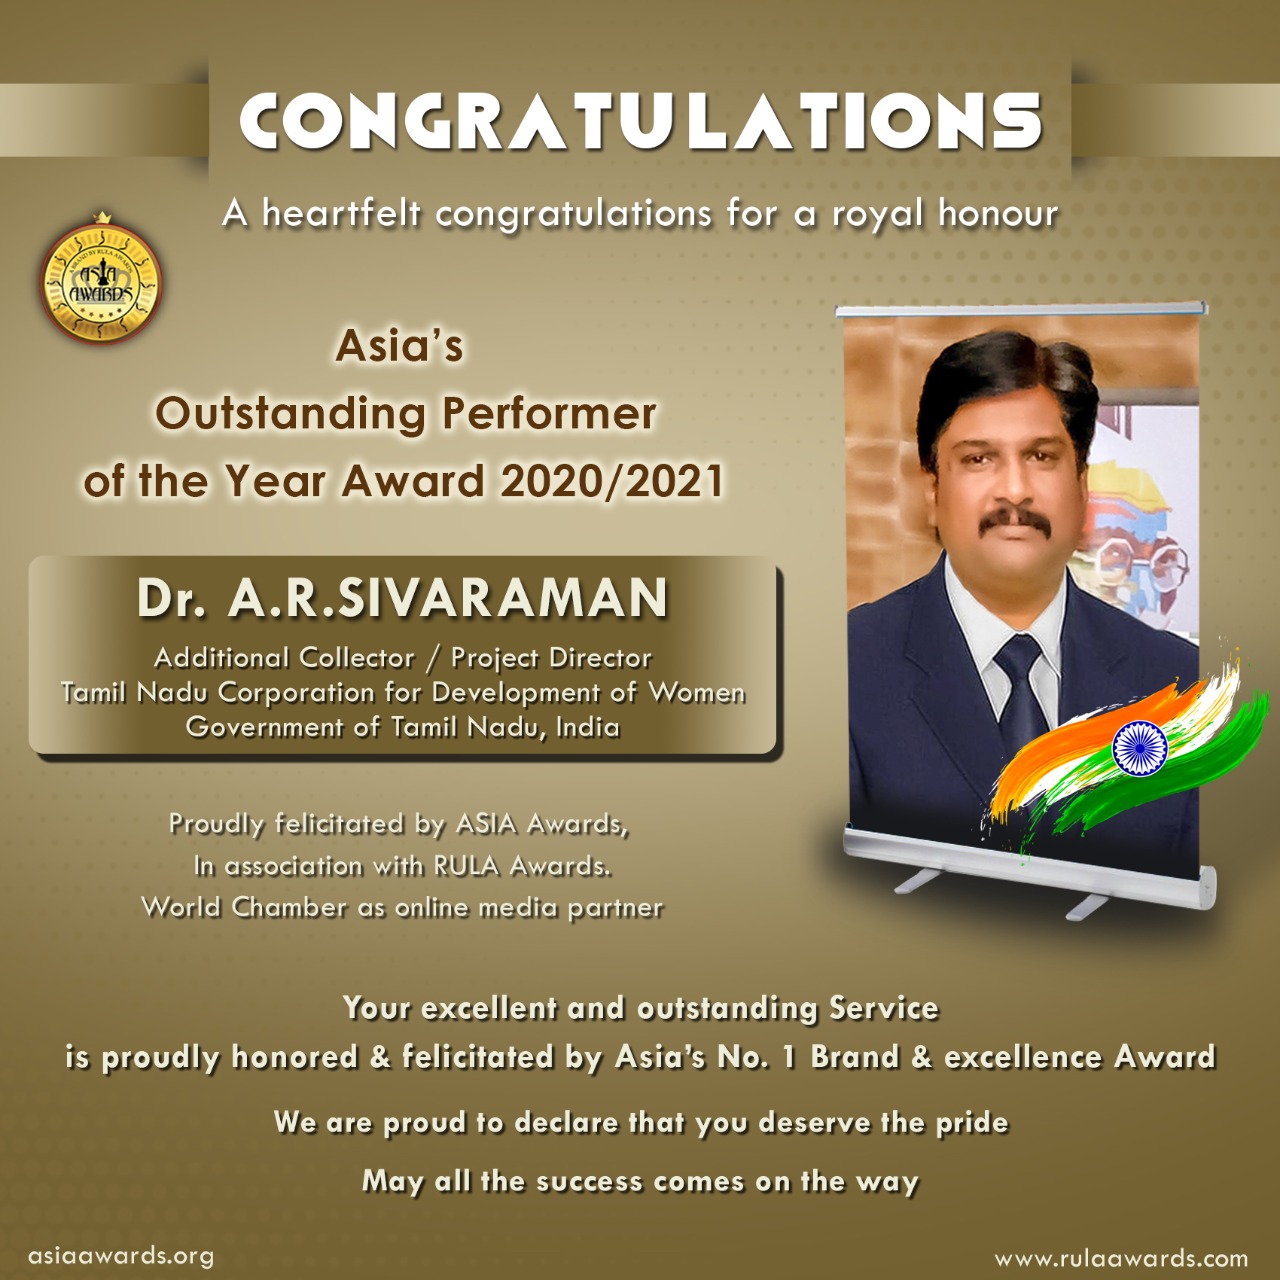 Dr.A.R Sivaraman has bagged Asia’s Outstanding Performer Award